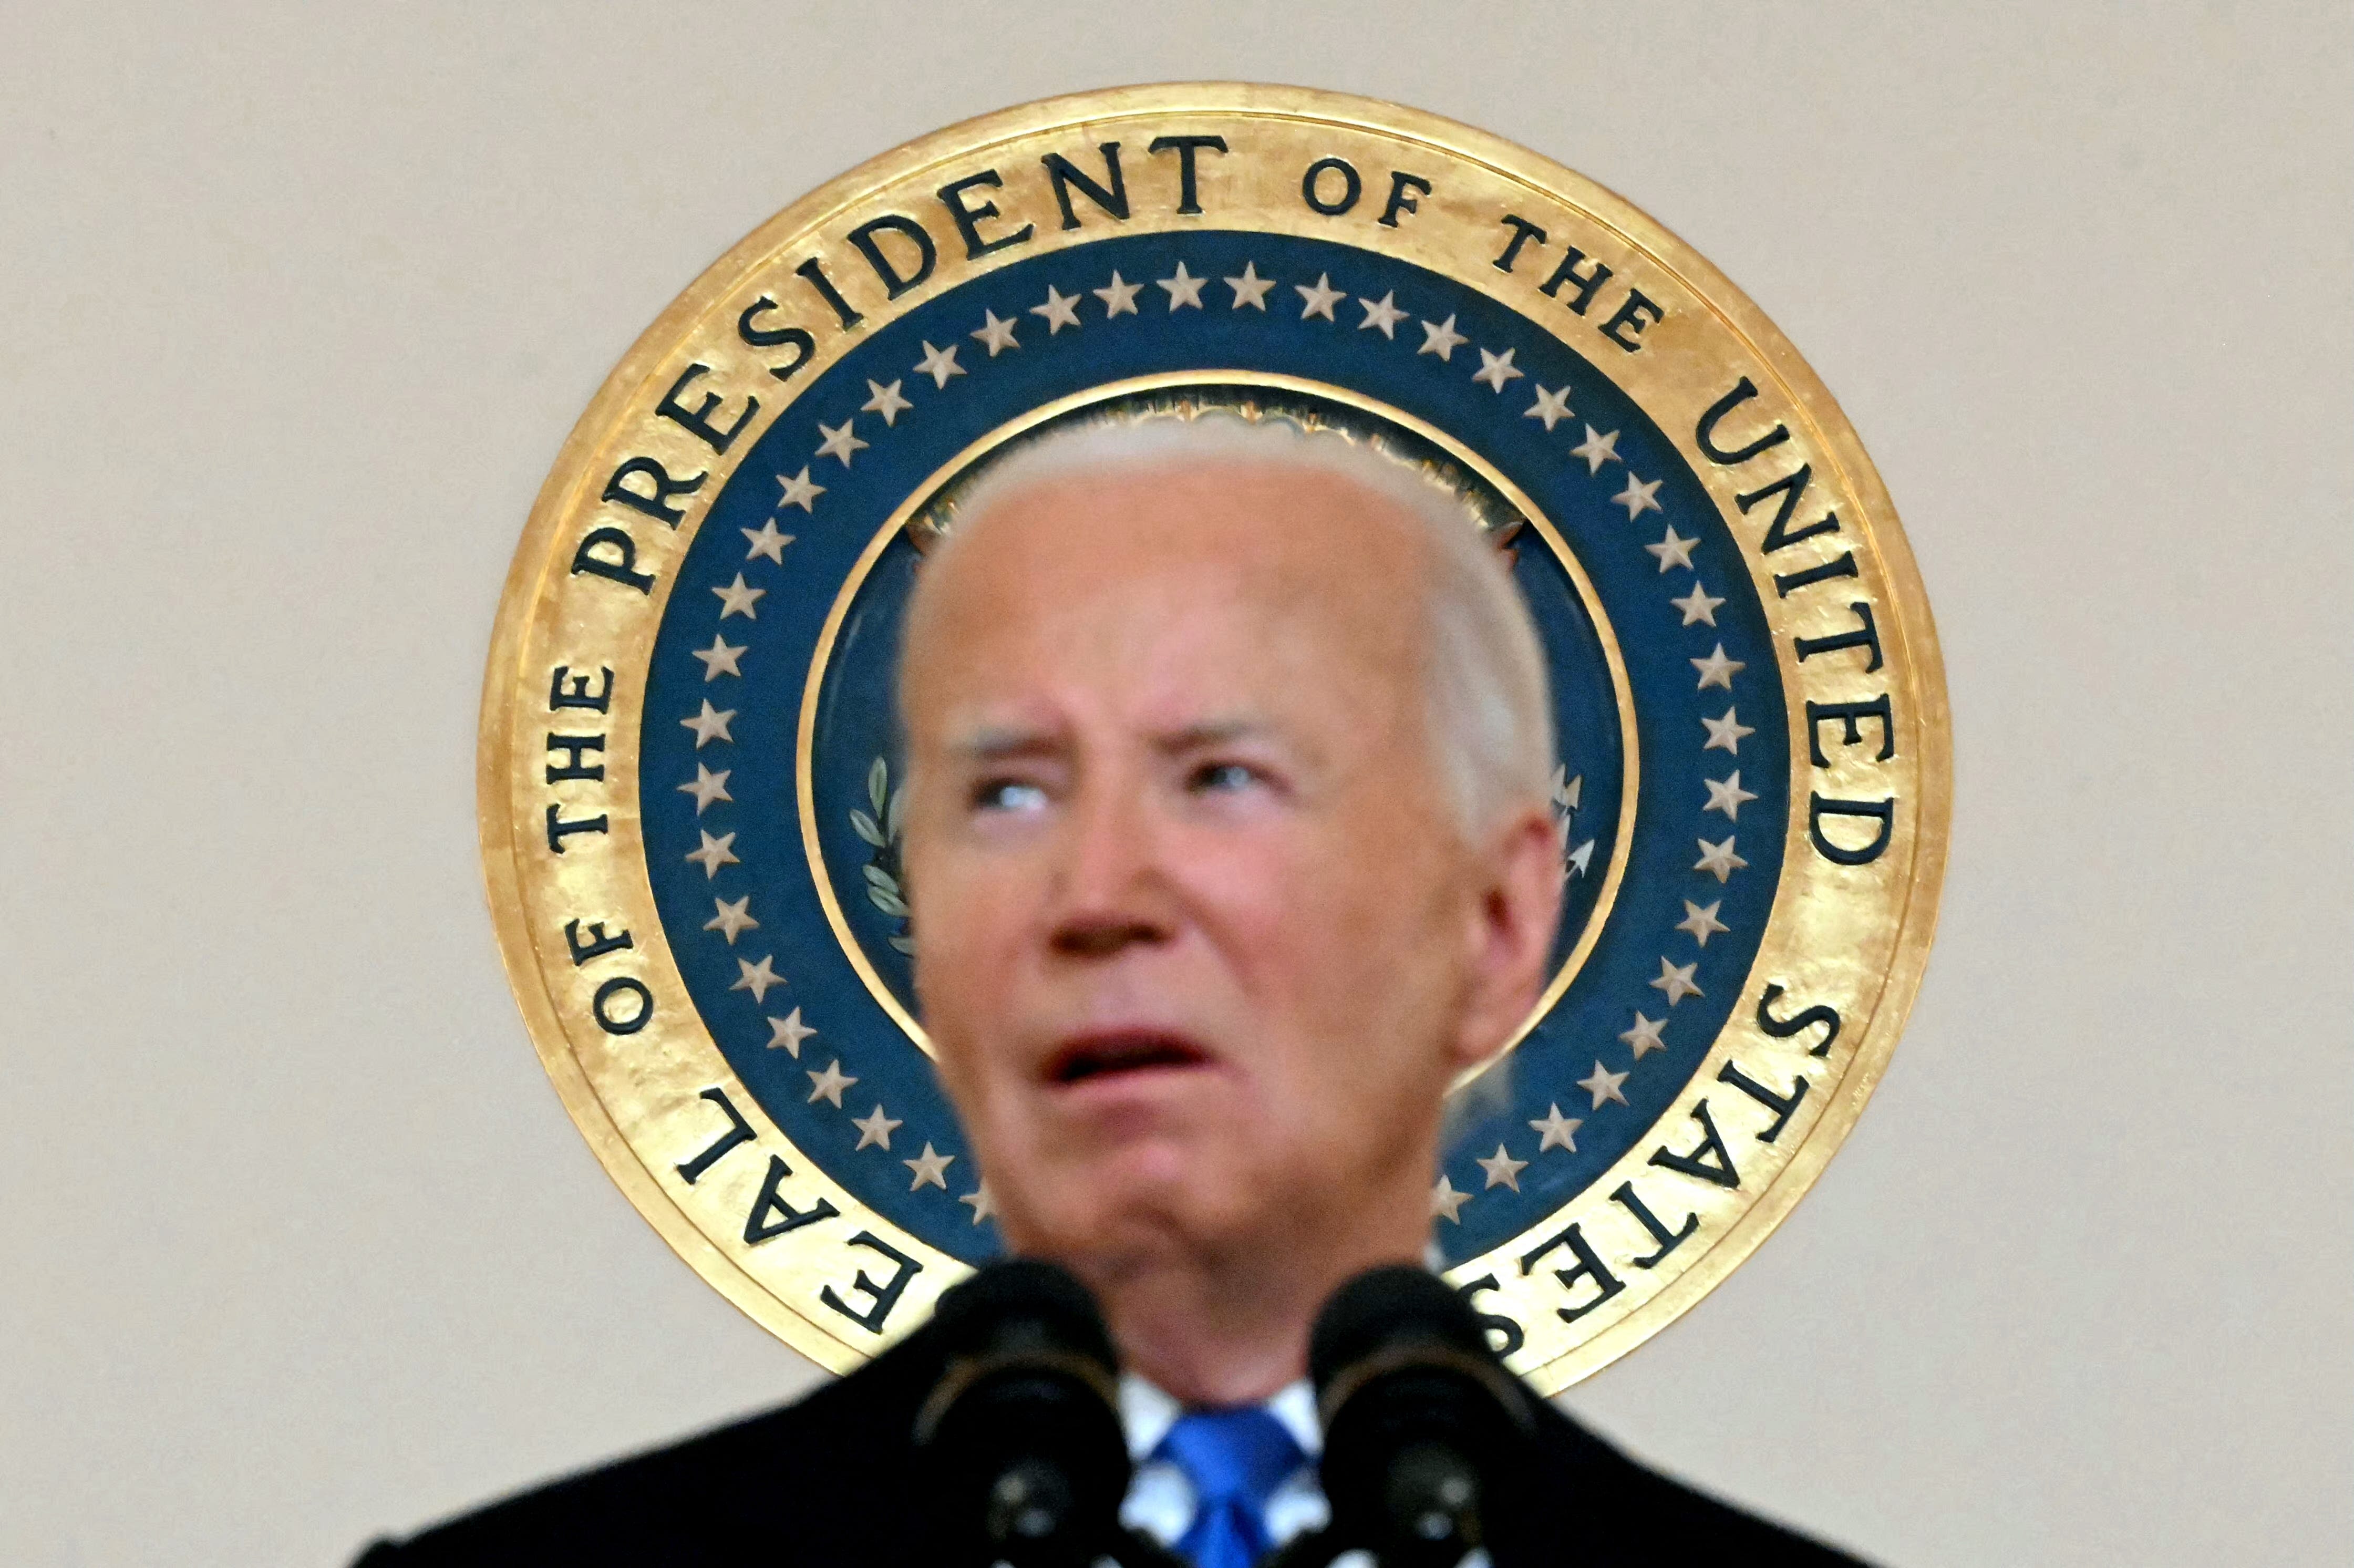 Democrats' cover-up of Biden decline raises hard questions. When did they know the truth?